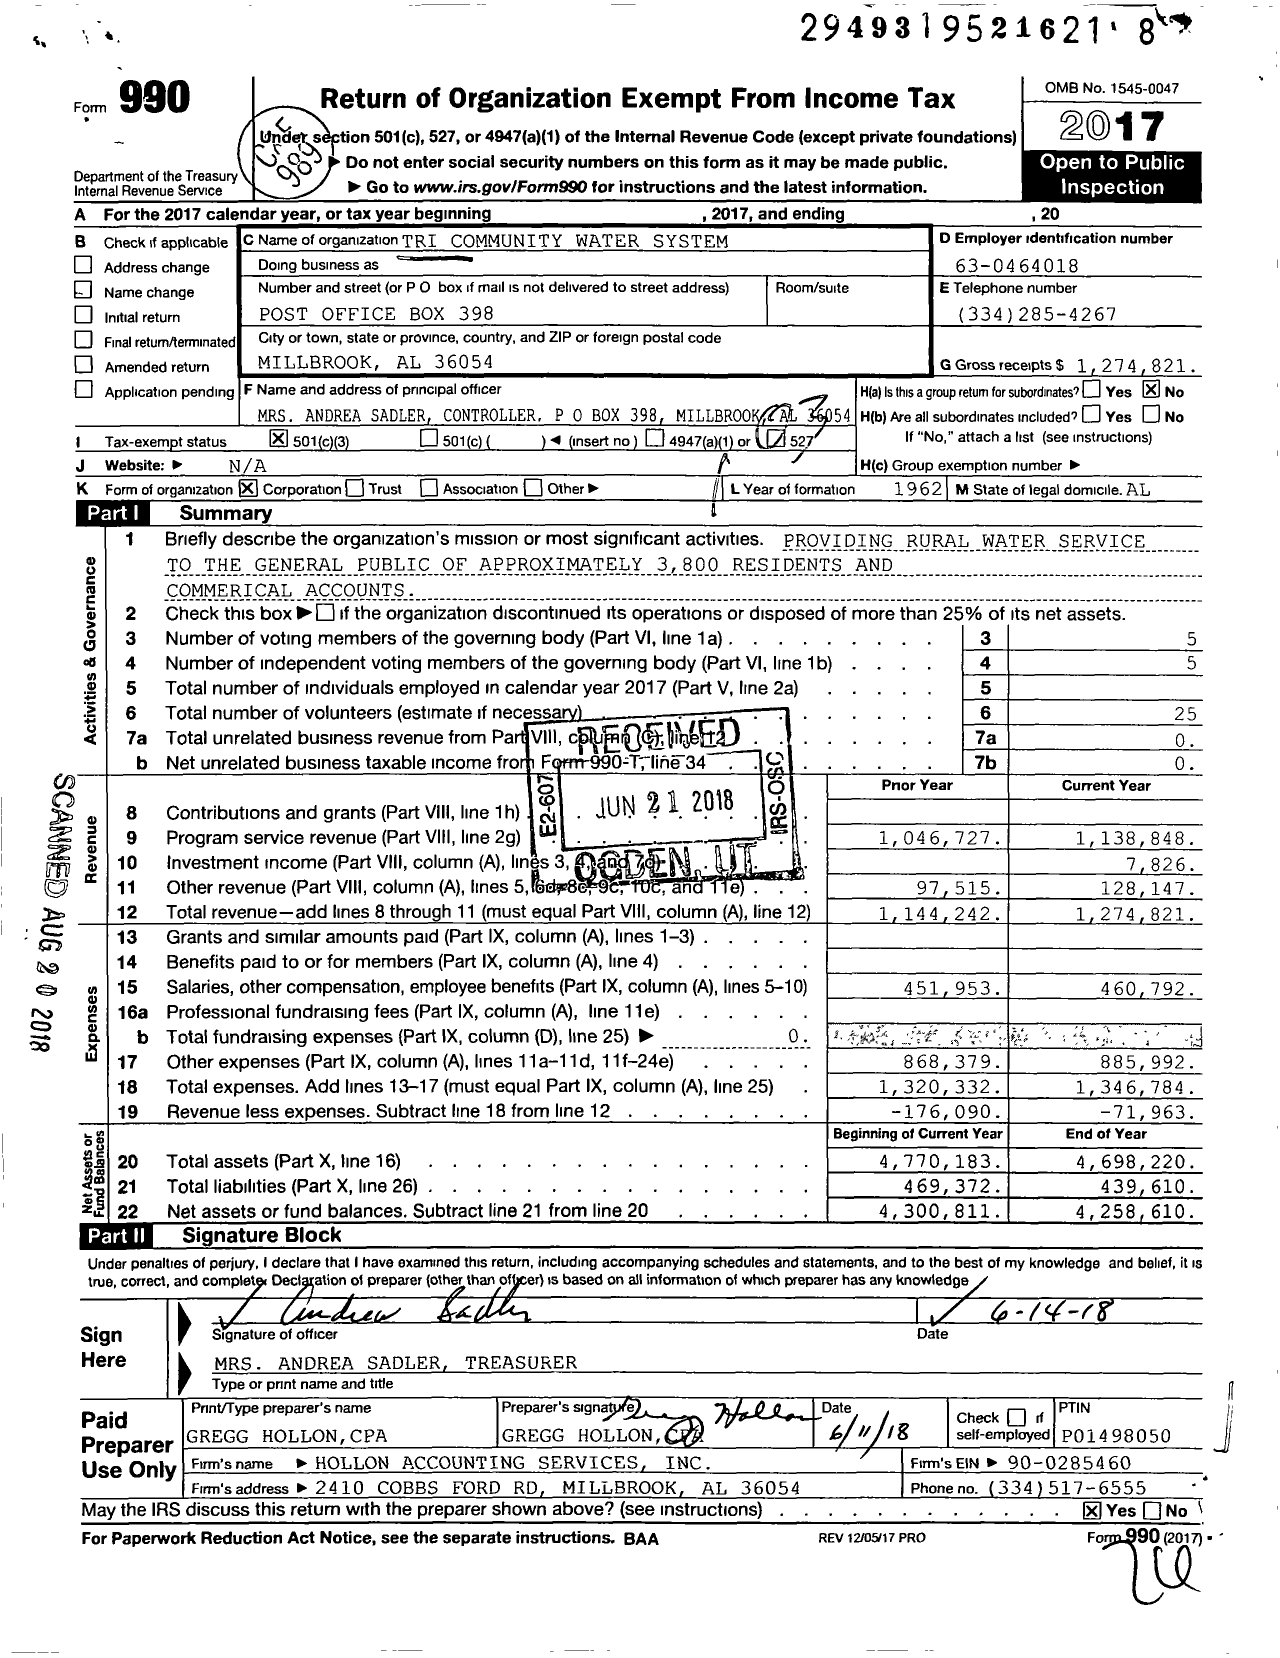 Image of first page of 2017 Form 990 for Tri Community Water System